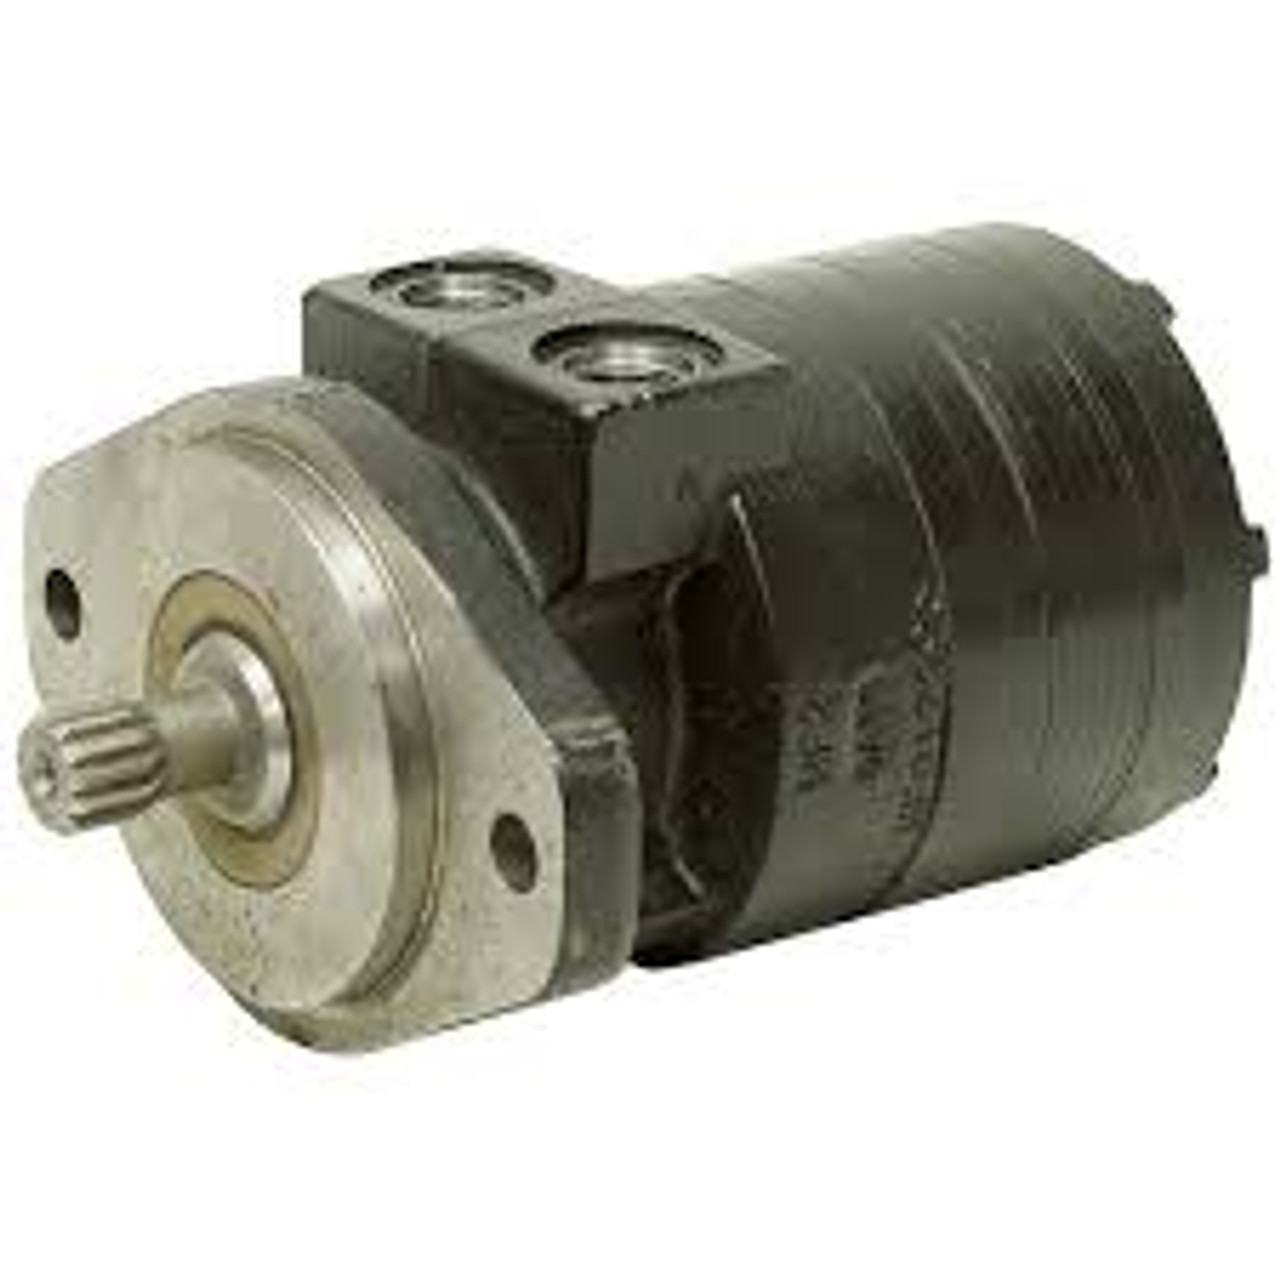 Ross MF051211AAAA interchange Hydraulic motor low speed high torque 4.75 cubic inch displacement  Dynamic Fluid Components